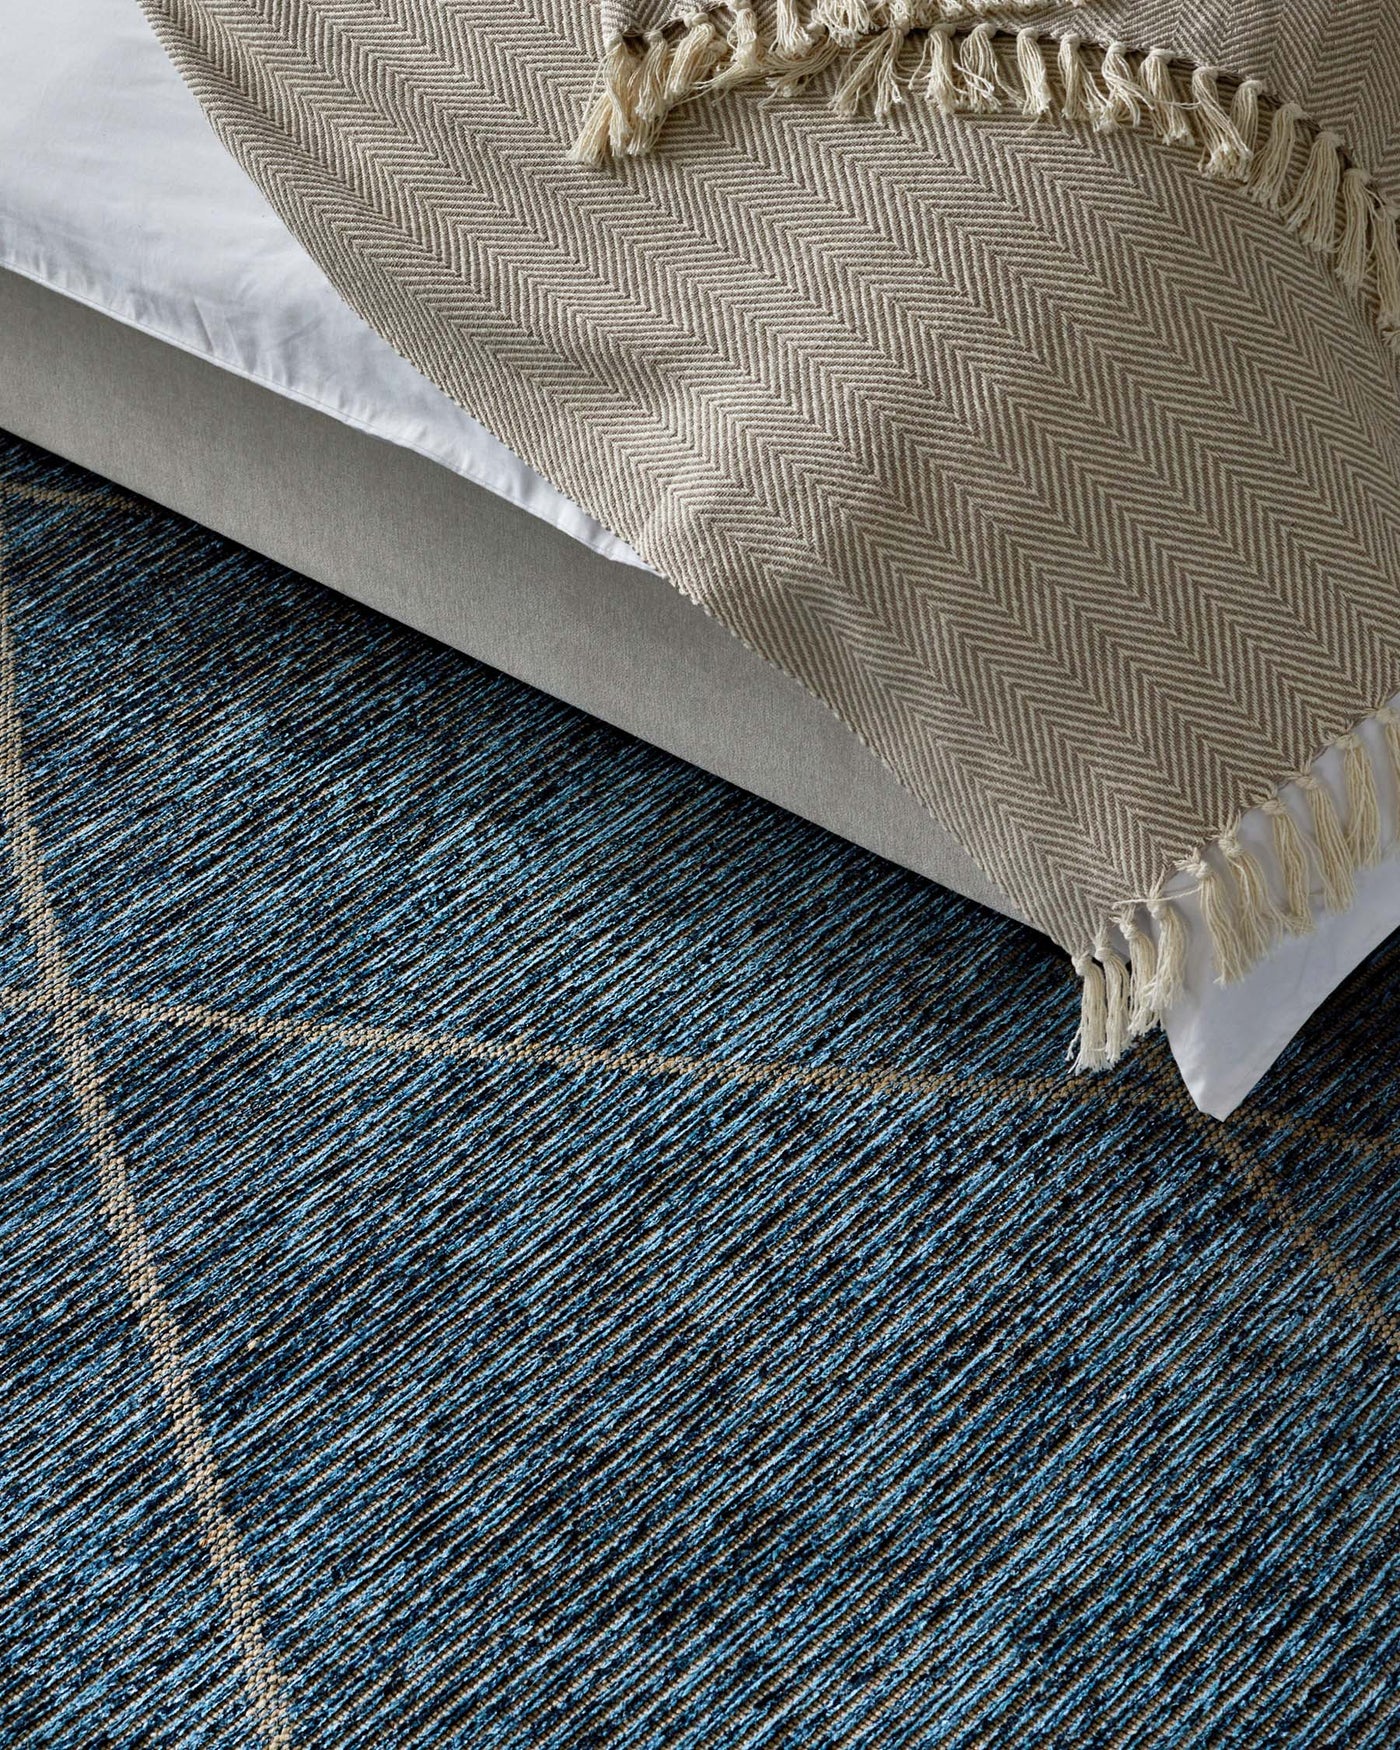 Corner of a minimalist upholstered platform bed with a herringbone-patterned throw blanket atop, set against a textured blue and black area rug.